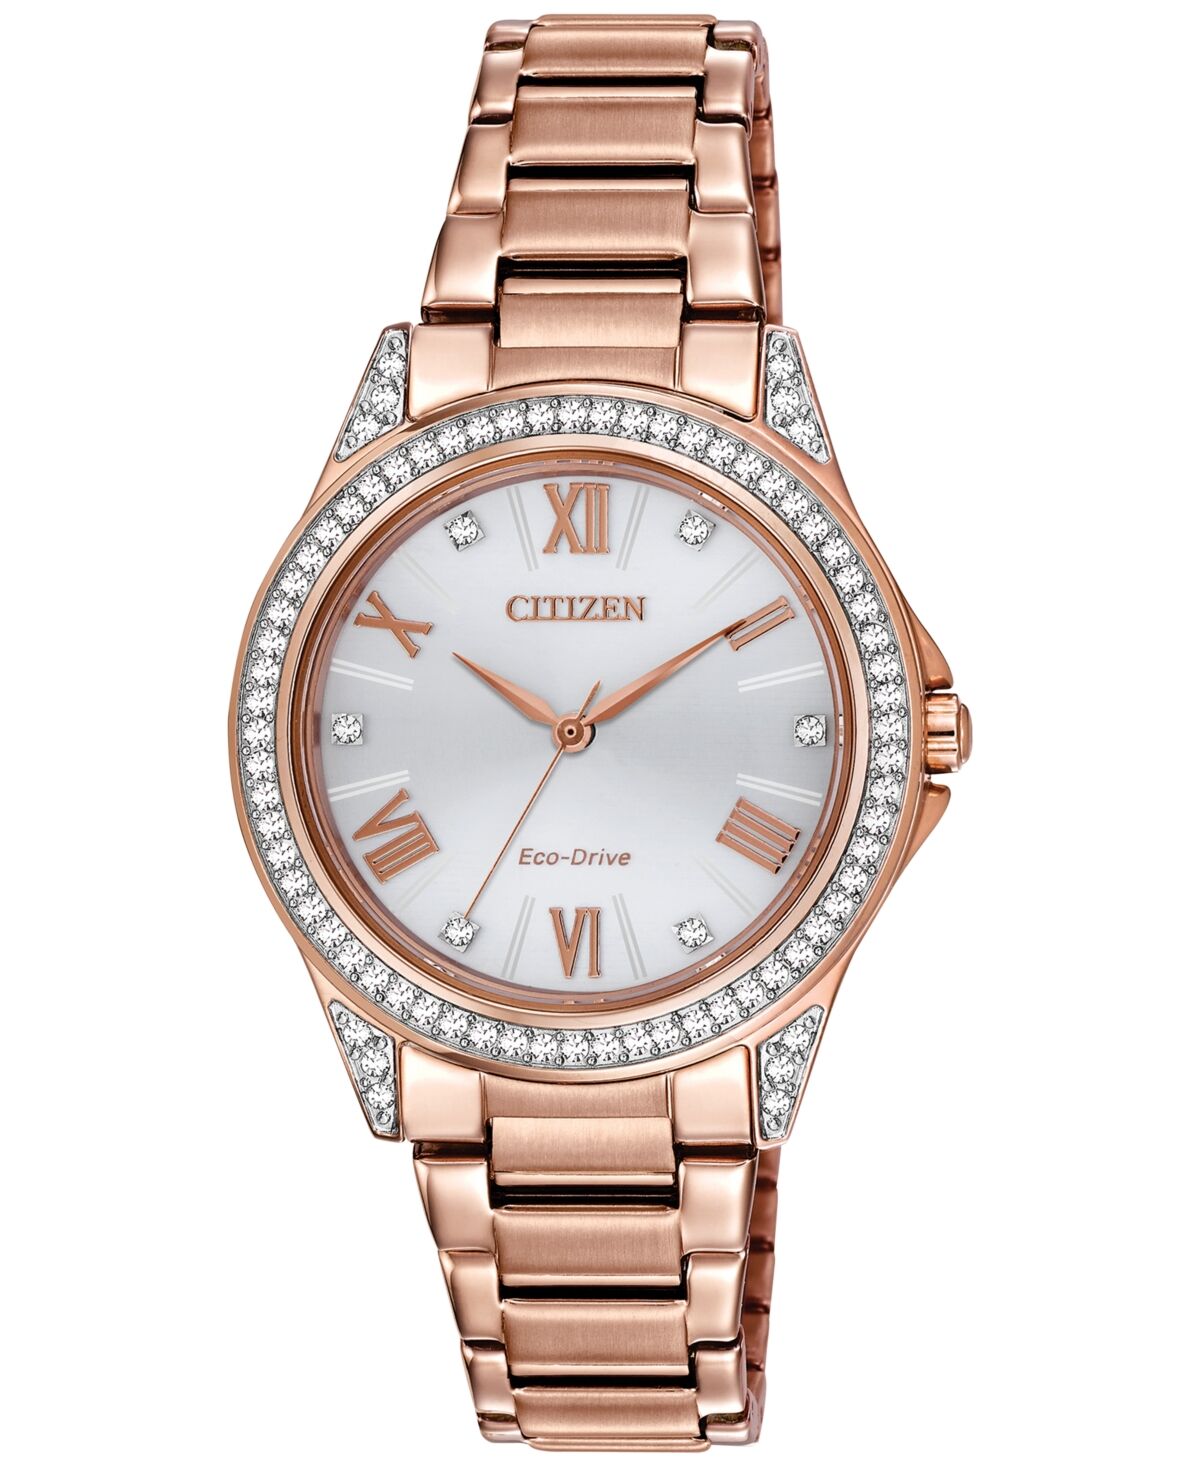 Citizen Drive From Citizen Eco-Drive Women's Rose Gold-Tone Stainless Steel Bracelet Watch 34mm - Rose Gold